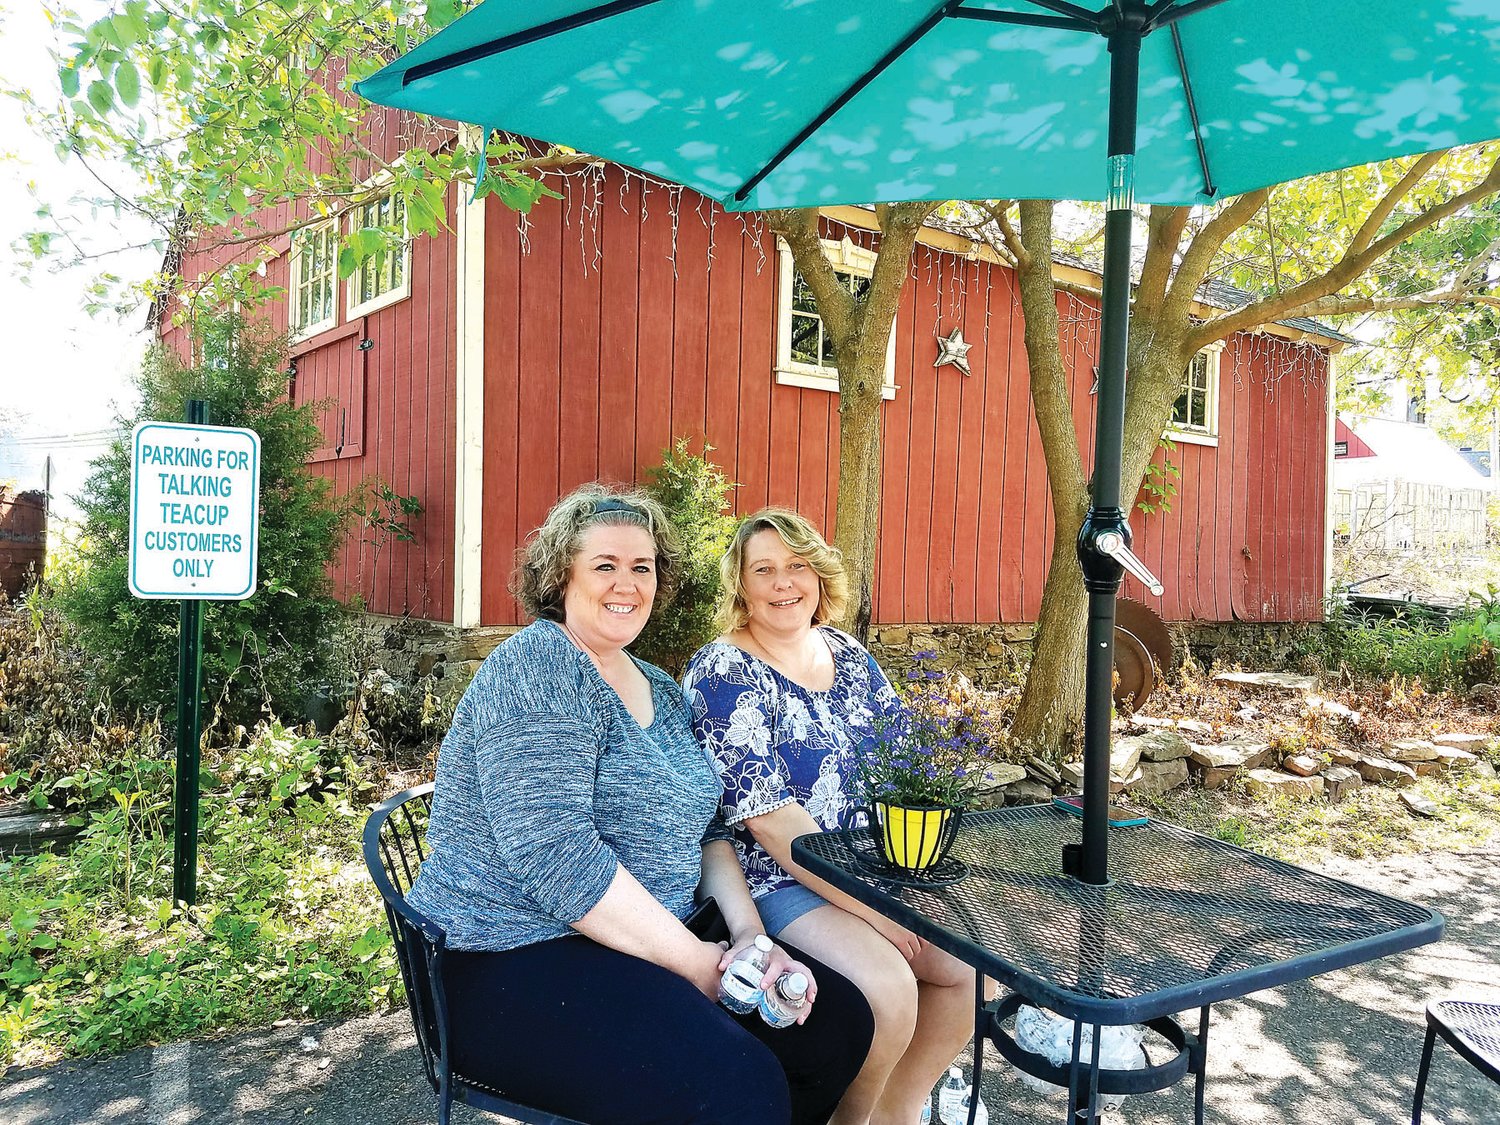 Patti Fitzpatrick, left, and Nicole Boyer expect to reopen The Talking Teacup in Chalfont sometime in June.